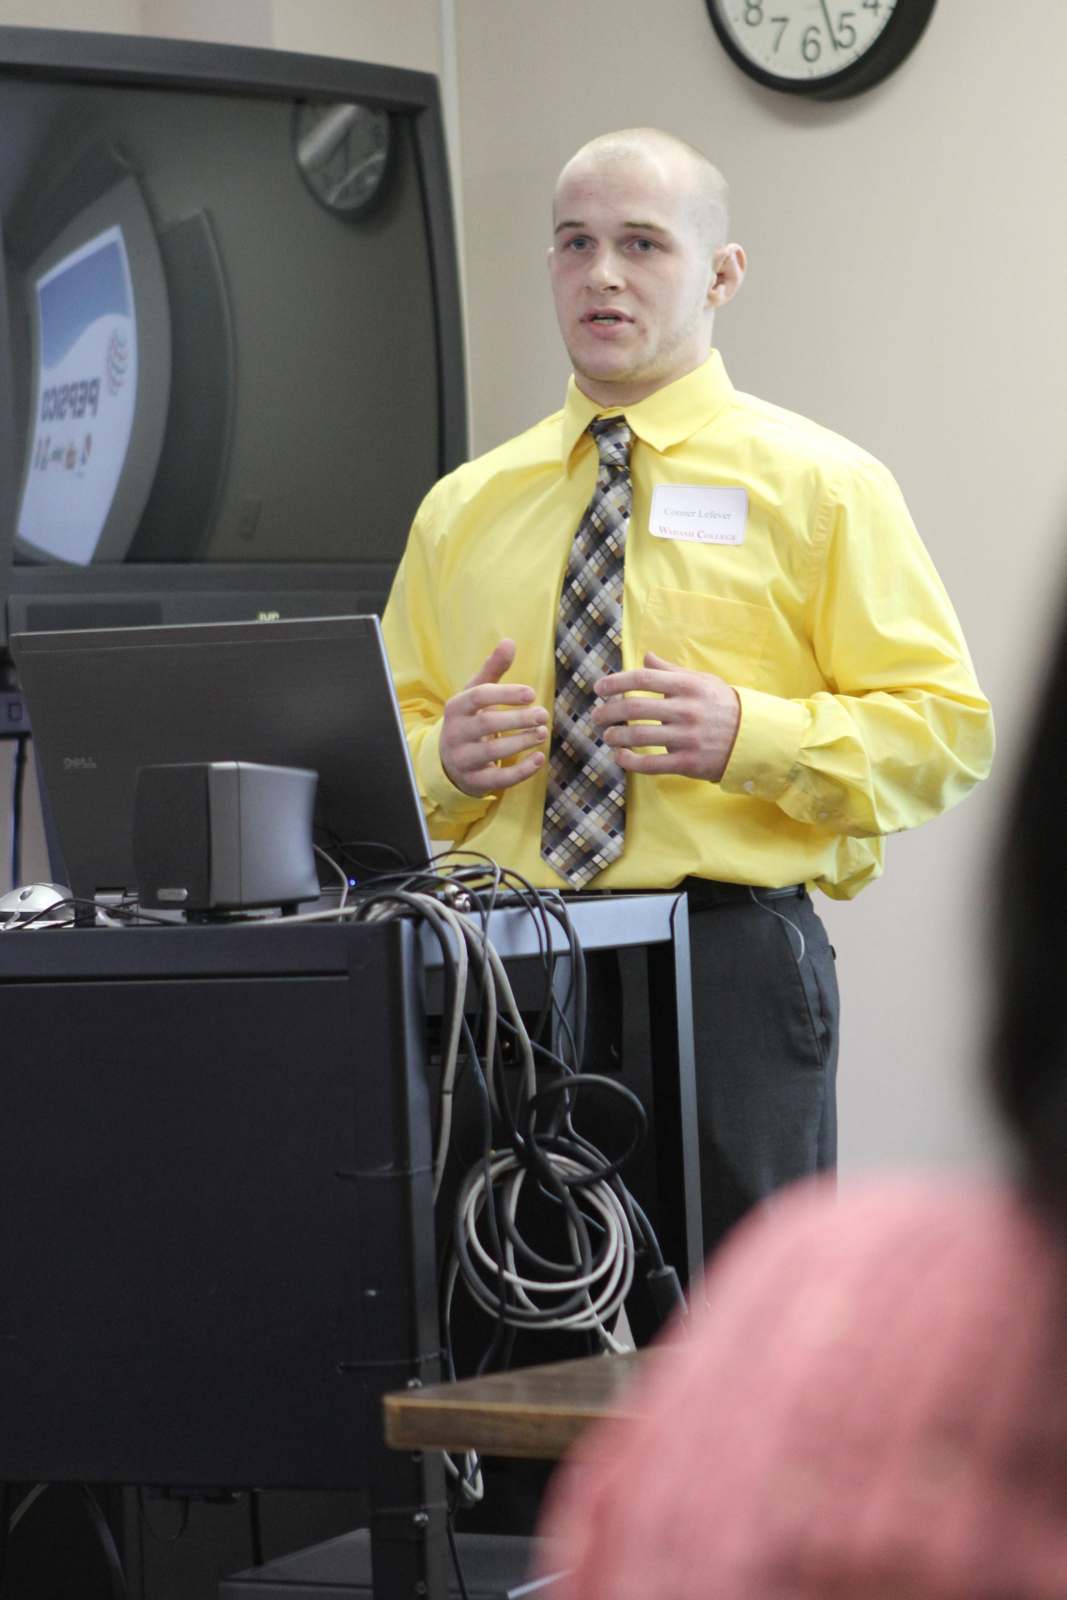 a man in a yellow shirt and tie standing next to a computer